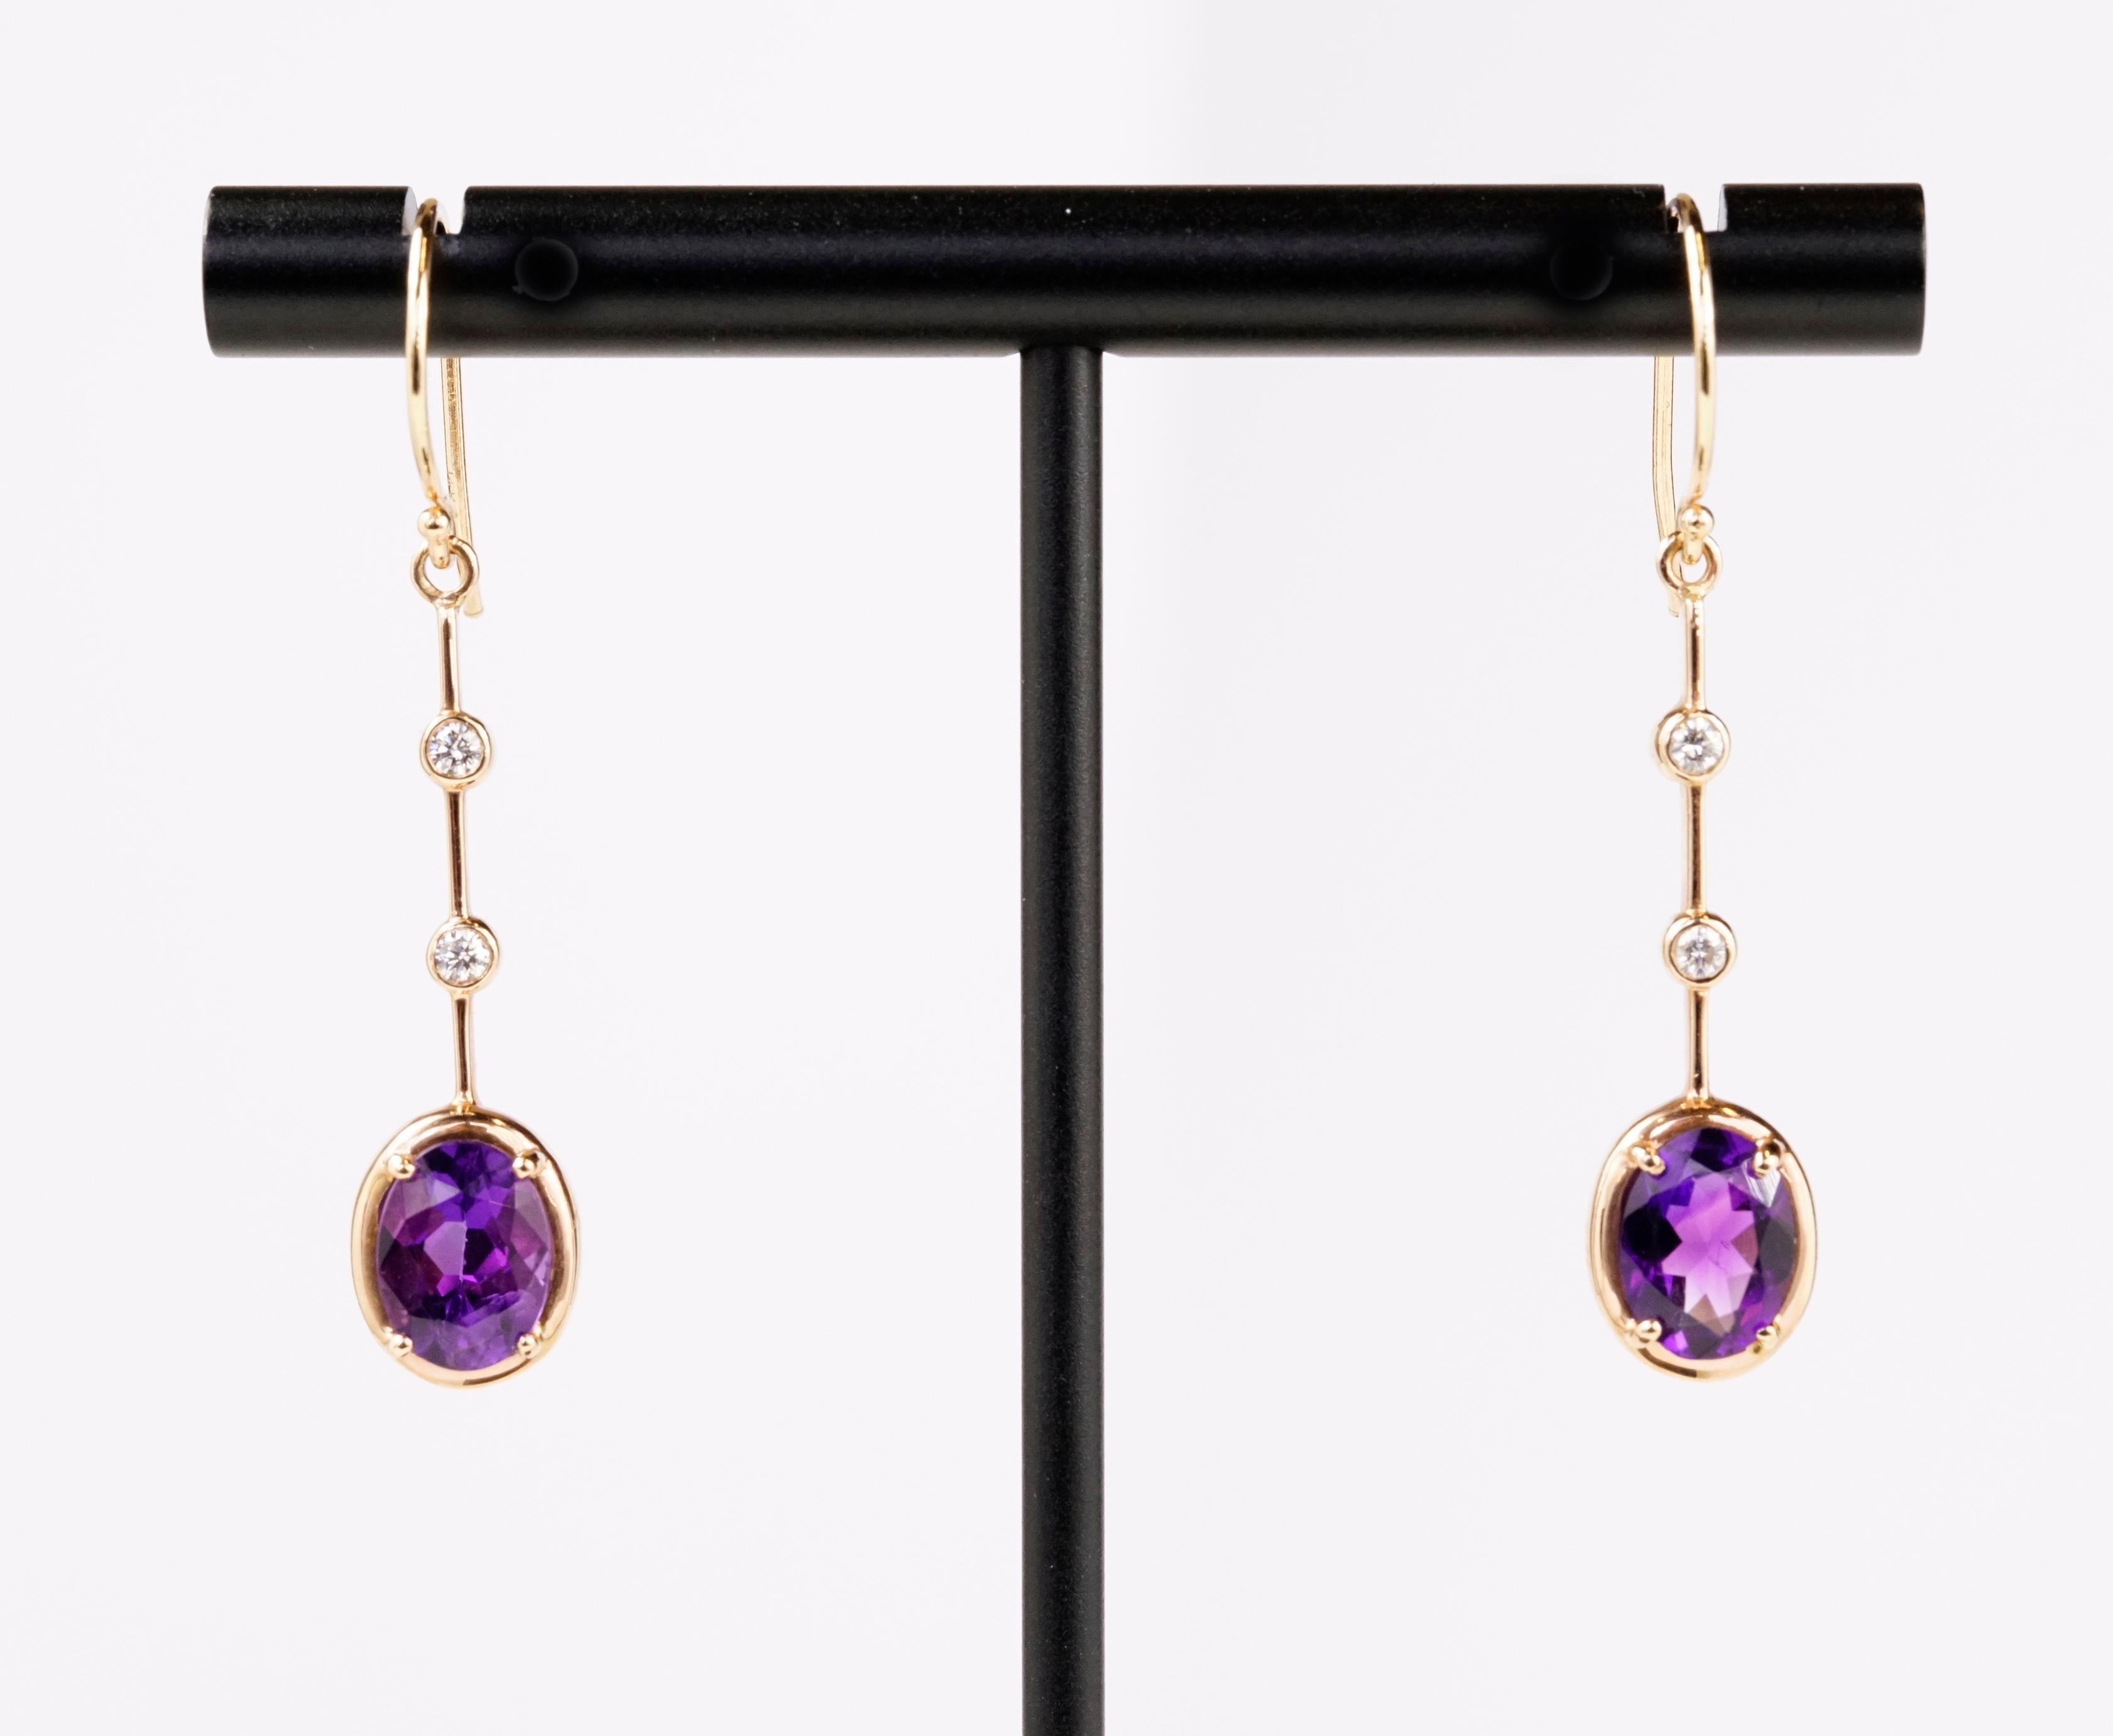 Drop dead gorgeous 14k Rose Gold Earrings set with Natural pair of amethyst ovals 2.10 carats total weight and round brilliant cut diamonds 0.11 carat total weight.
2.21 Carats Total Weight.  